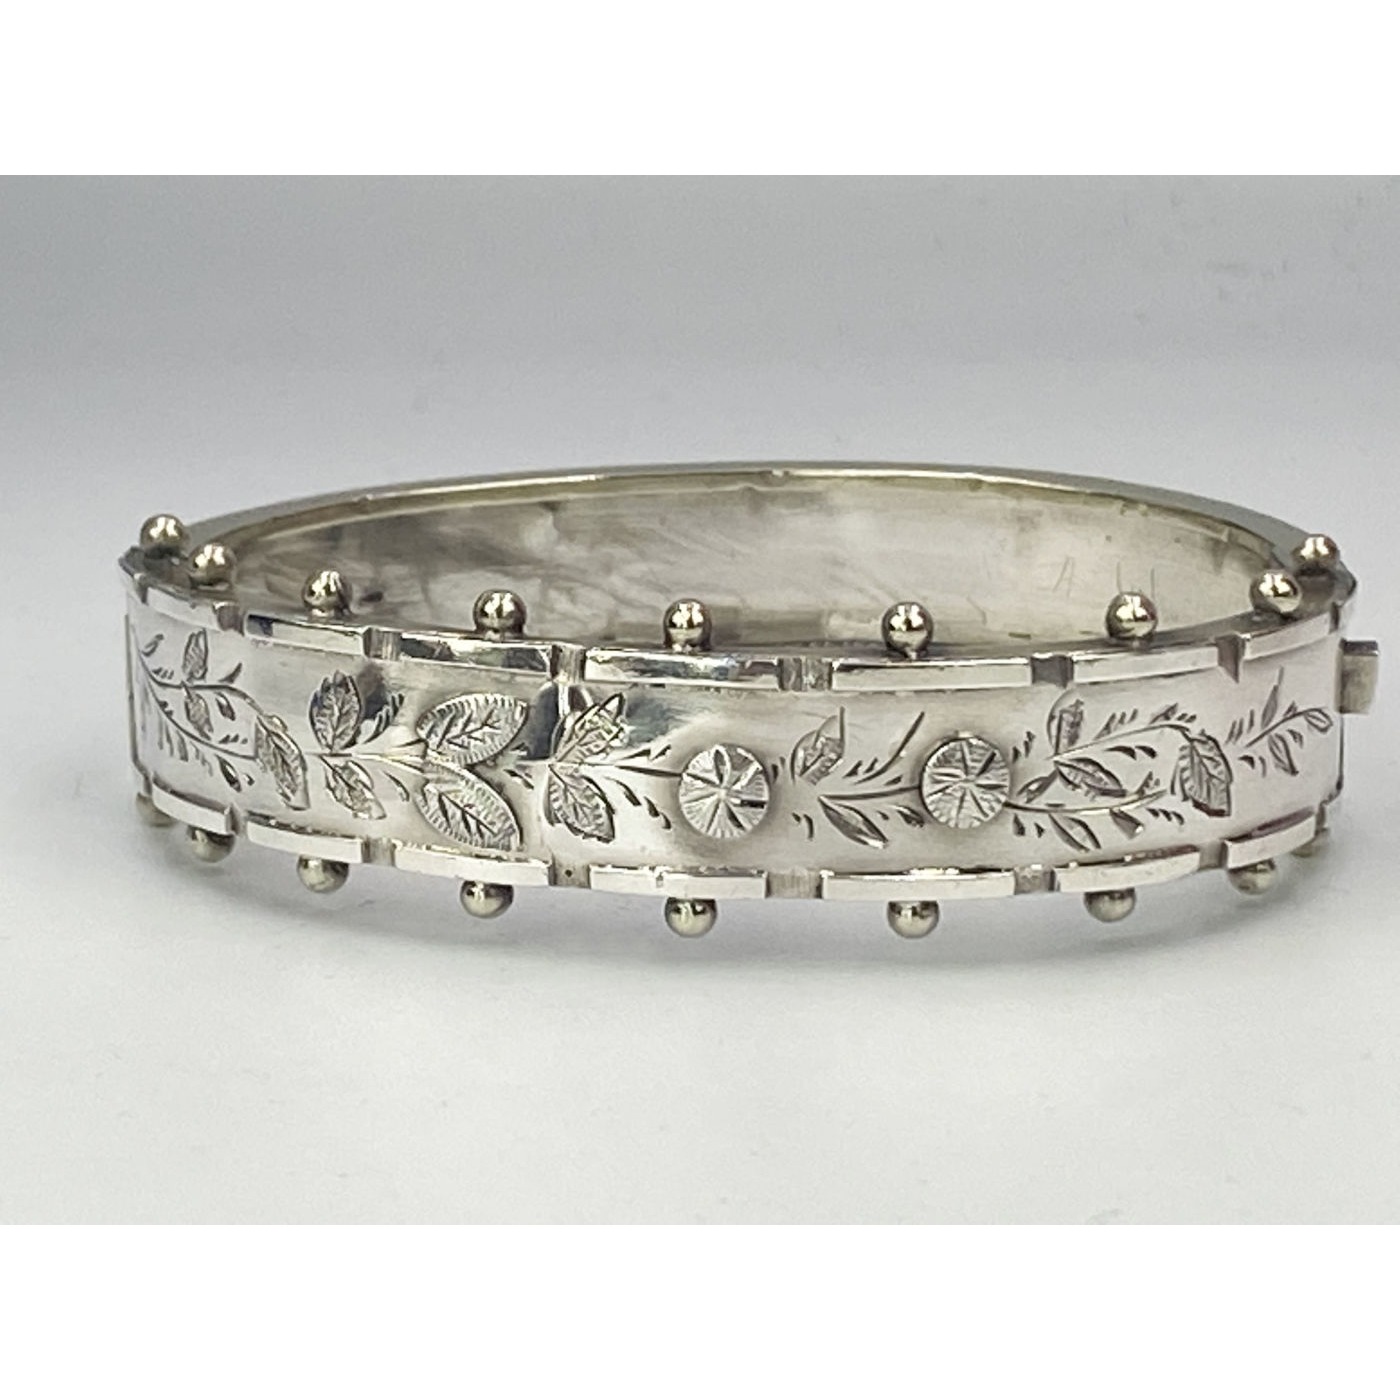 Beaded Outer Edge Applied Flowers Narrow English Silver Bangle